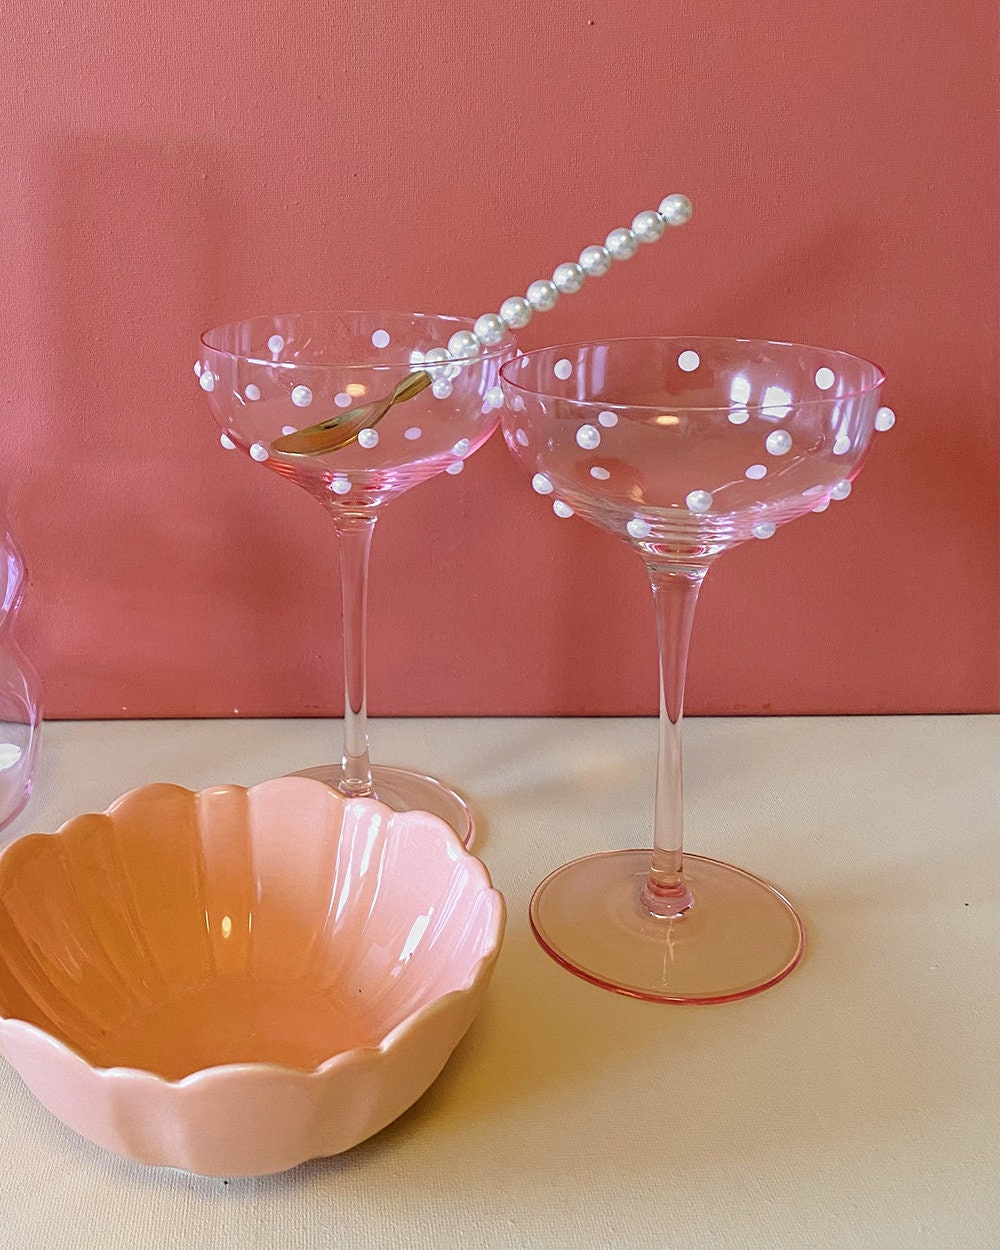 Esthetic Glass Cups Creative Drinking Glasses Set of 4 Unique Cocktail  Glassware Water Glass Cup for…See more Esthetic Glass Cups Creative  Drinking